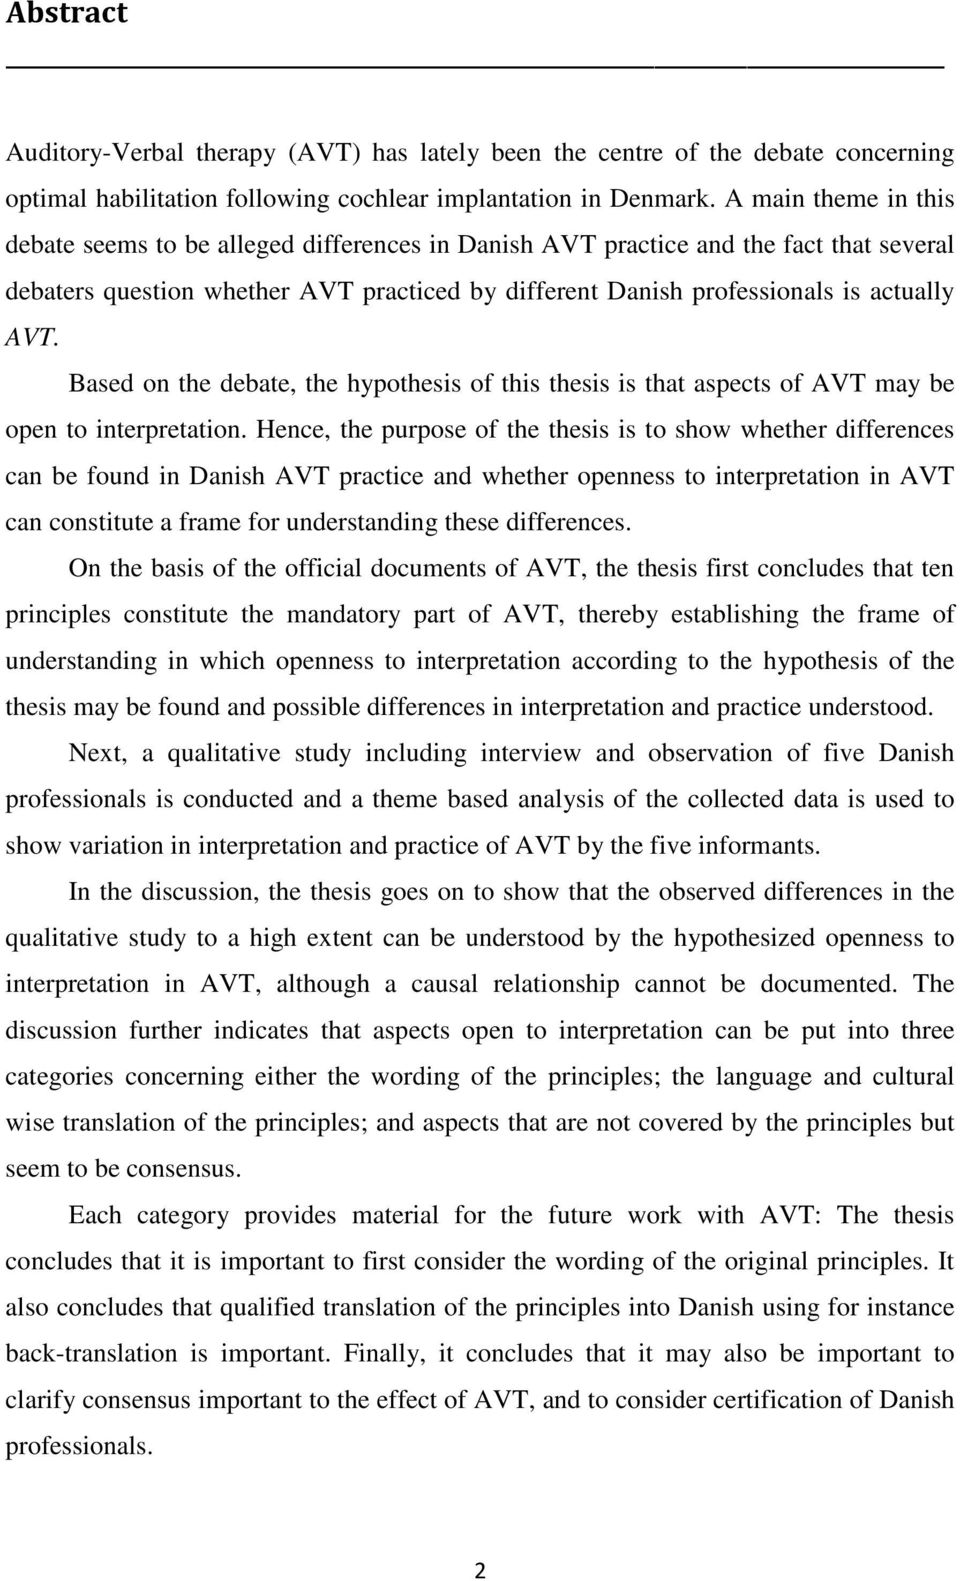 Based on the debate, the hypothesis of this thesis is that aspects of AVT may be open to interpretation.